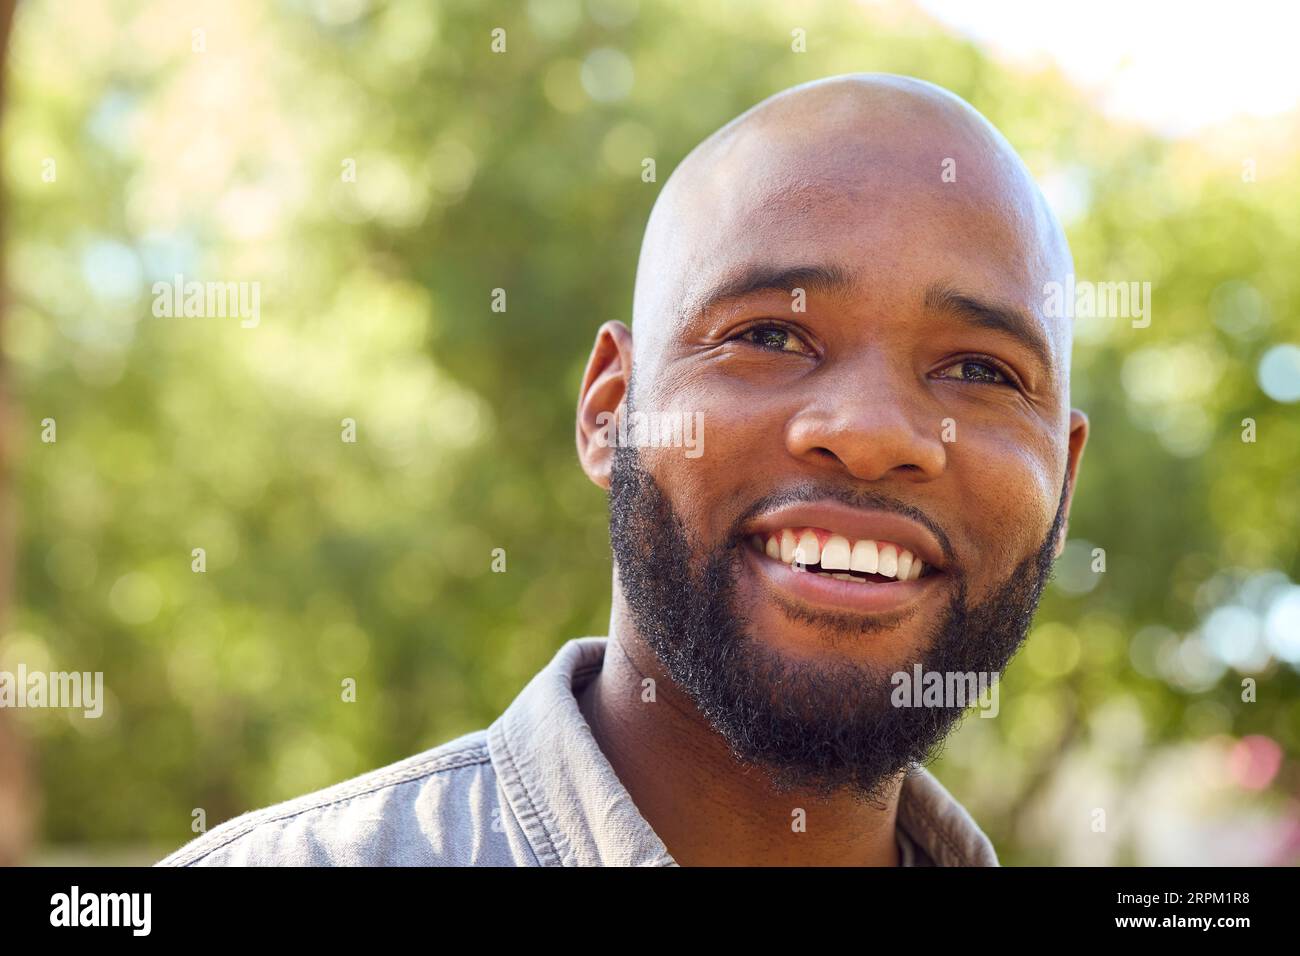 Portrait Of Smiling Man Standing Outdoors In Garden Park Or Countryside Stock Photo